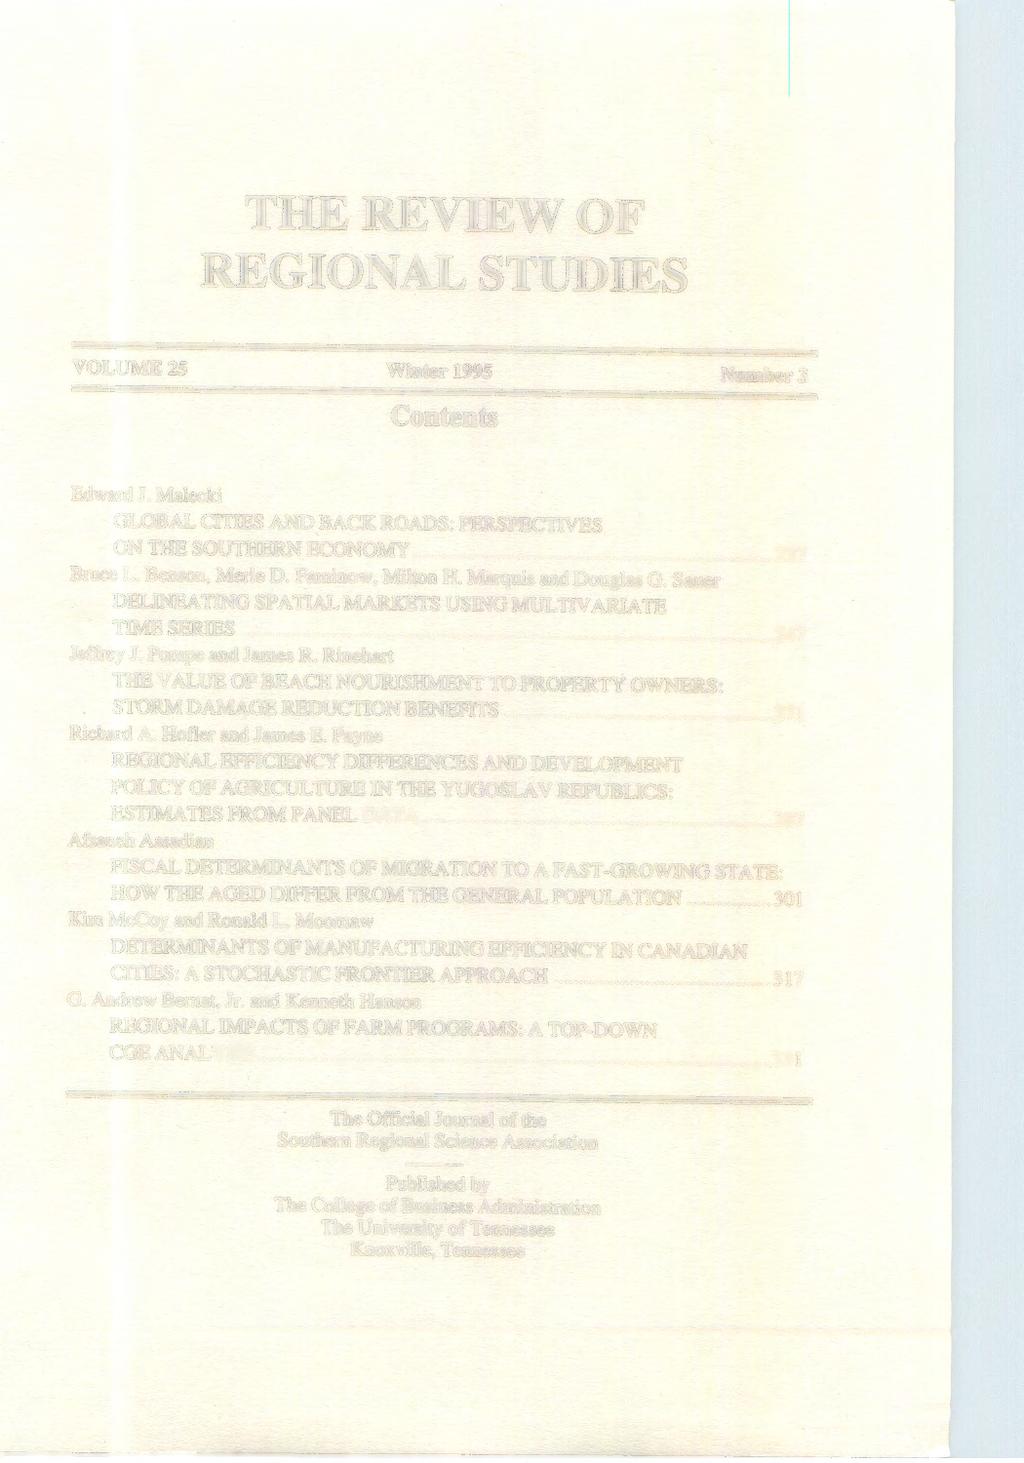 THE REVIEW OF REGIONAL STUDIES VOLUME25 Winter 1995 Contents Number3 Edward J. Malecki GLOBAL CITIES AND BACK ROADS: PERSPECTNES ON THE SOUTHERN ECONOMY... 237 Bruce L. Benson, Merle D.